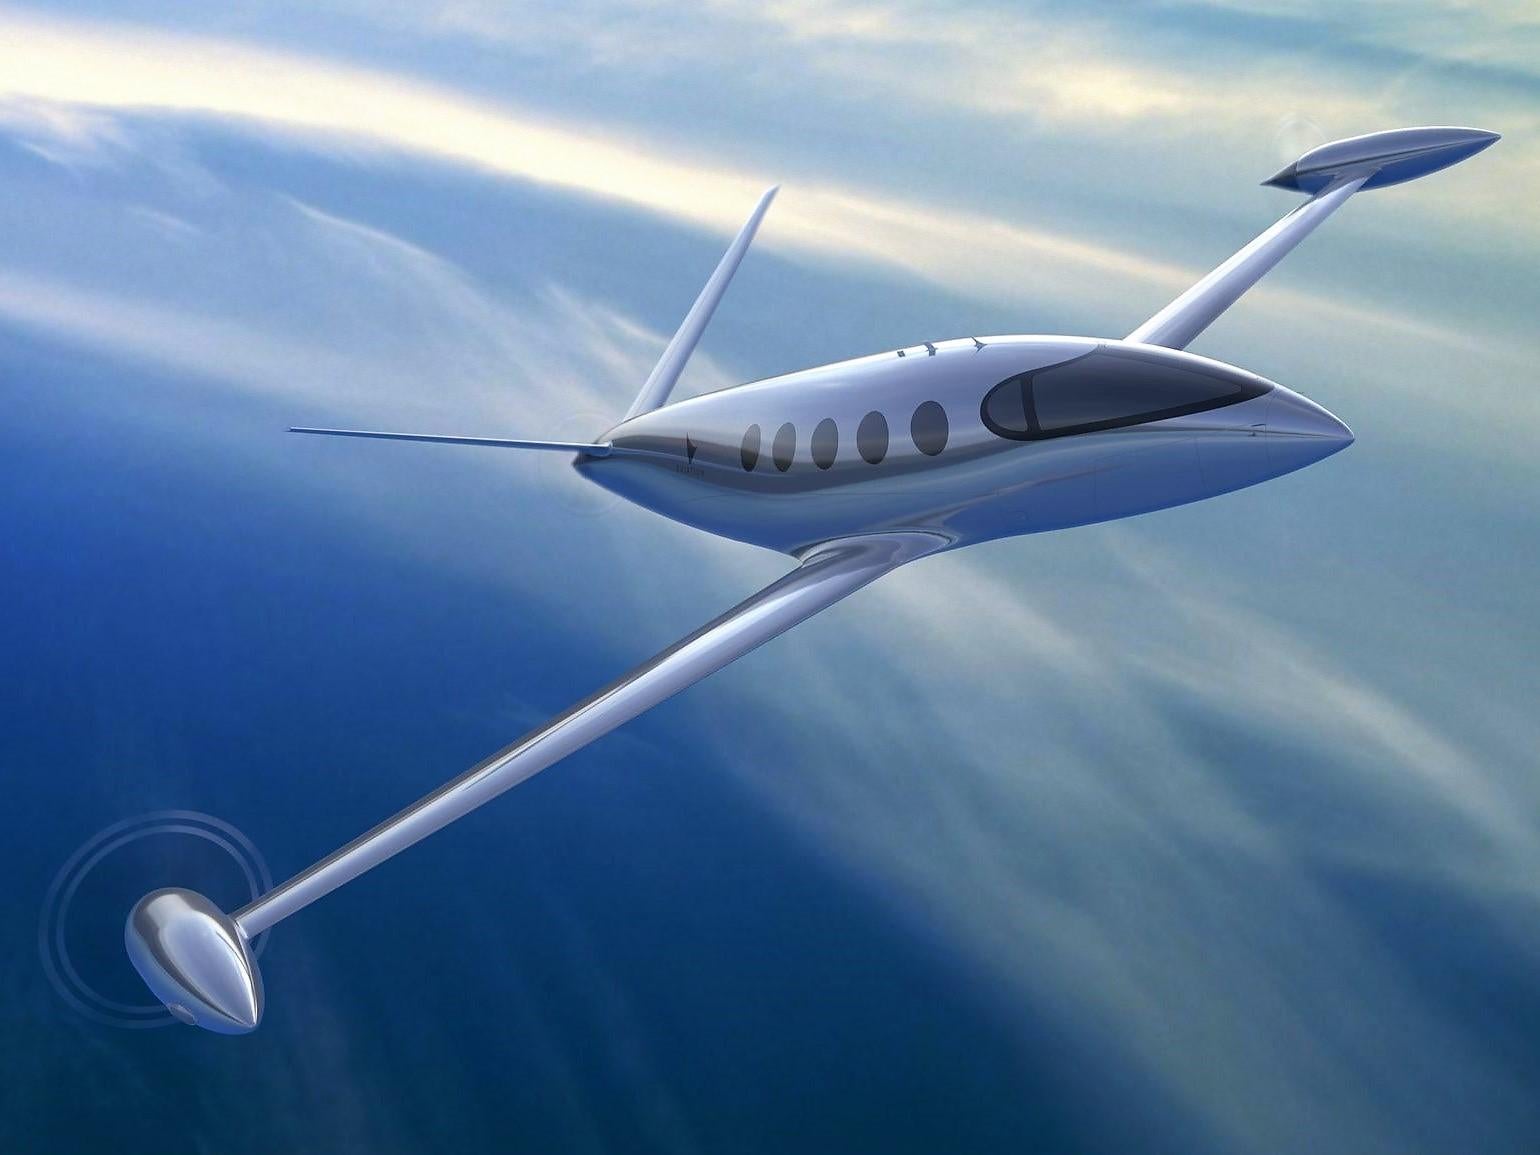 Battery technology has limited the development of electric planes